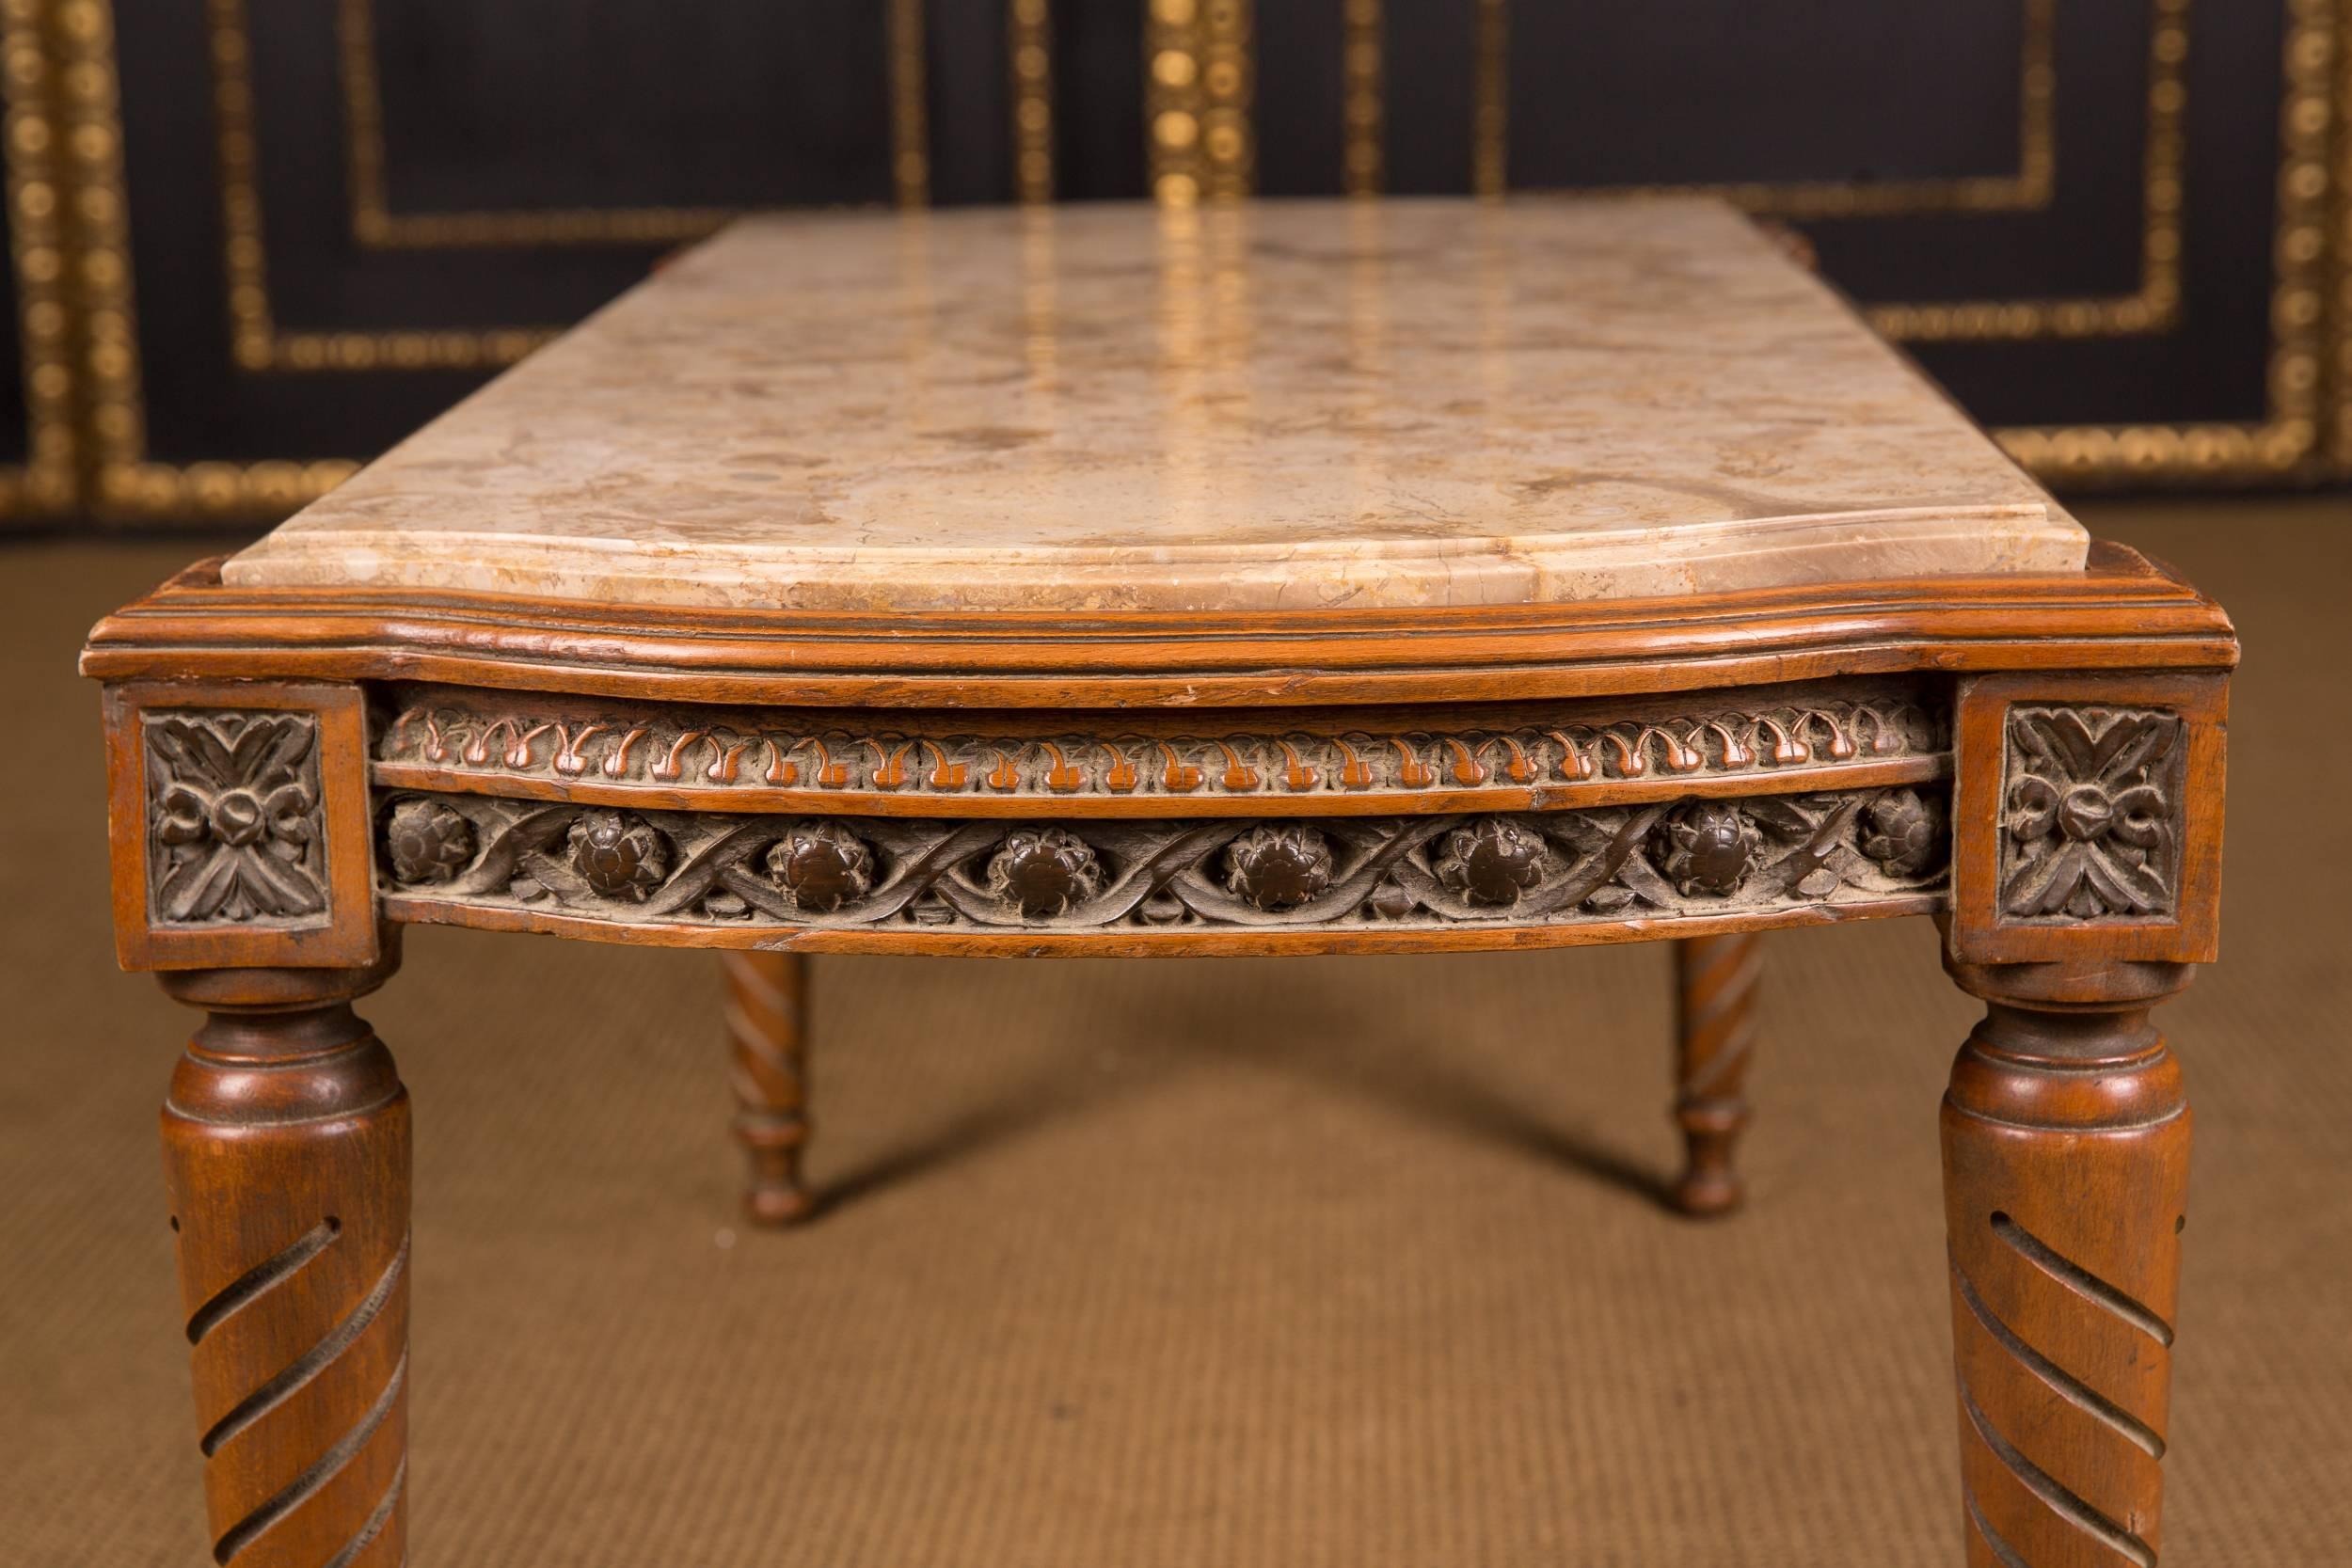 High Quality Table with Marble Top in Louis Seize Style im Zustand „Gut“ in Berlin, DE